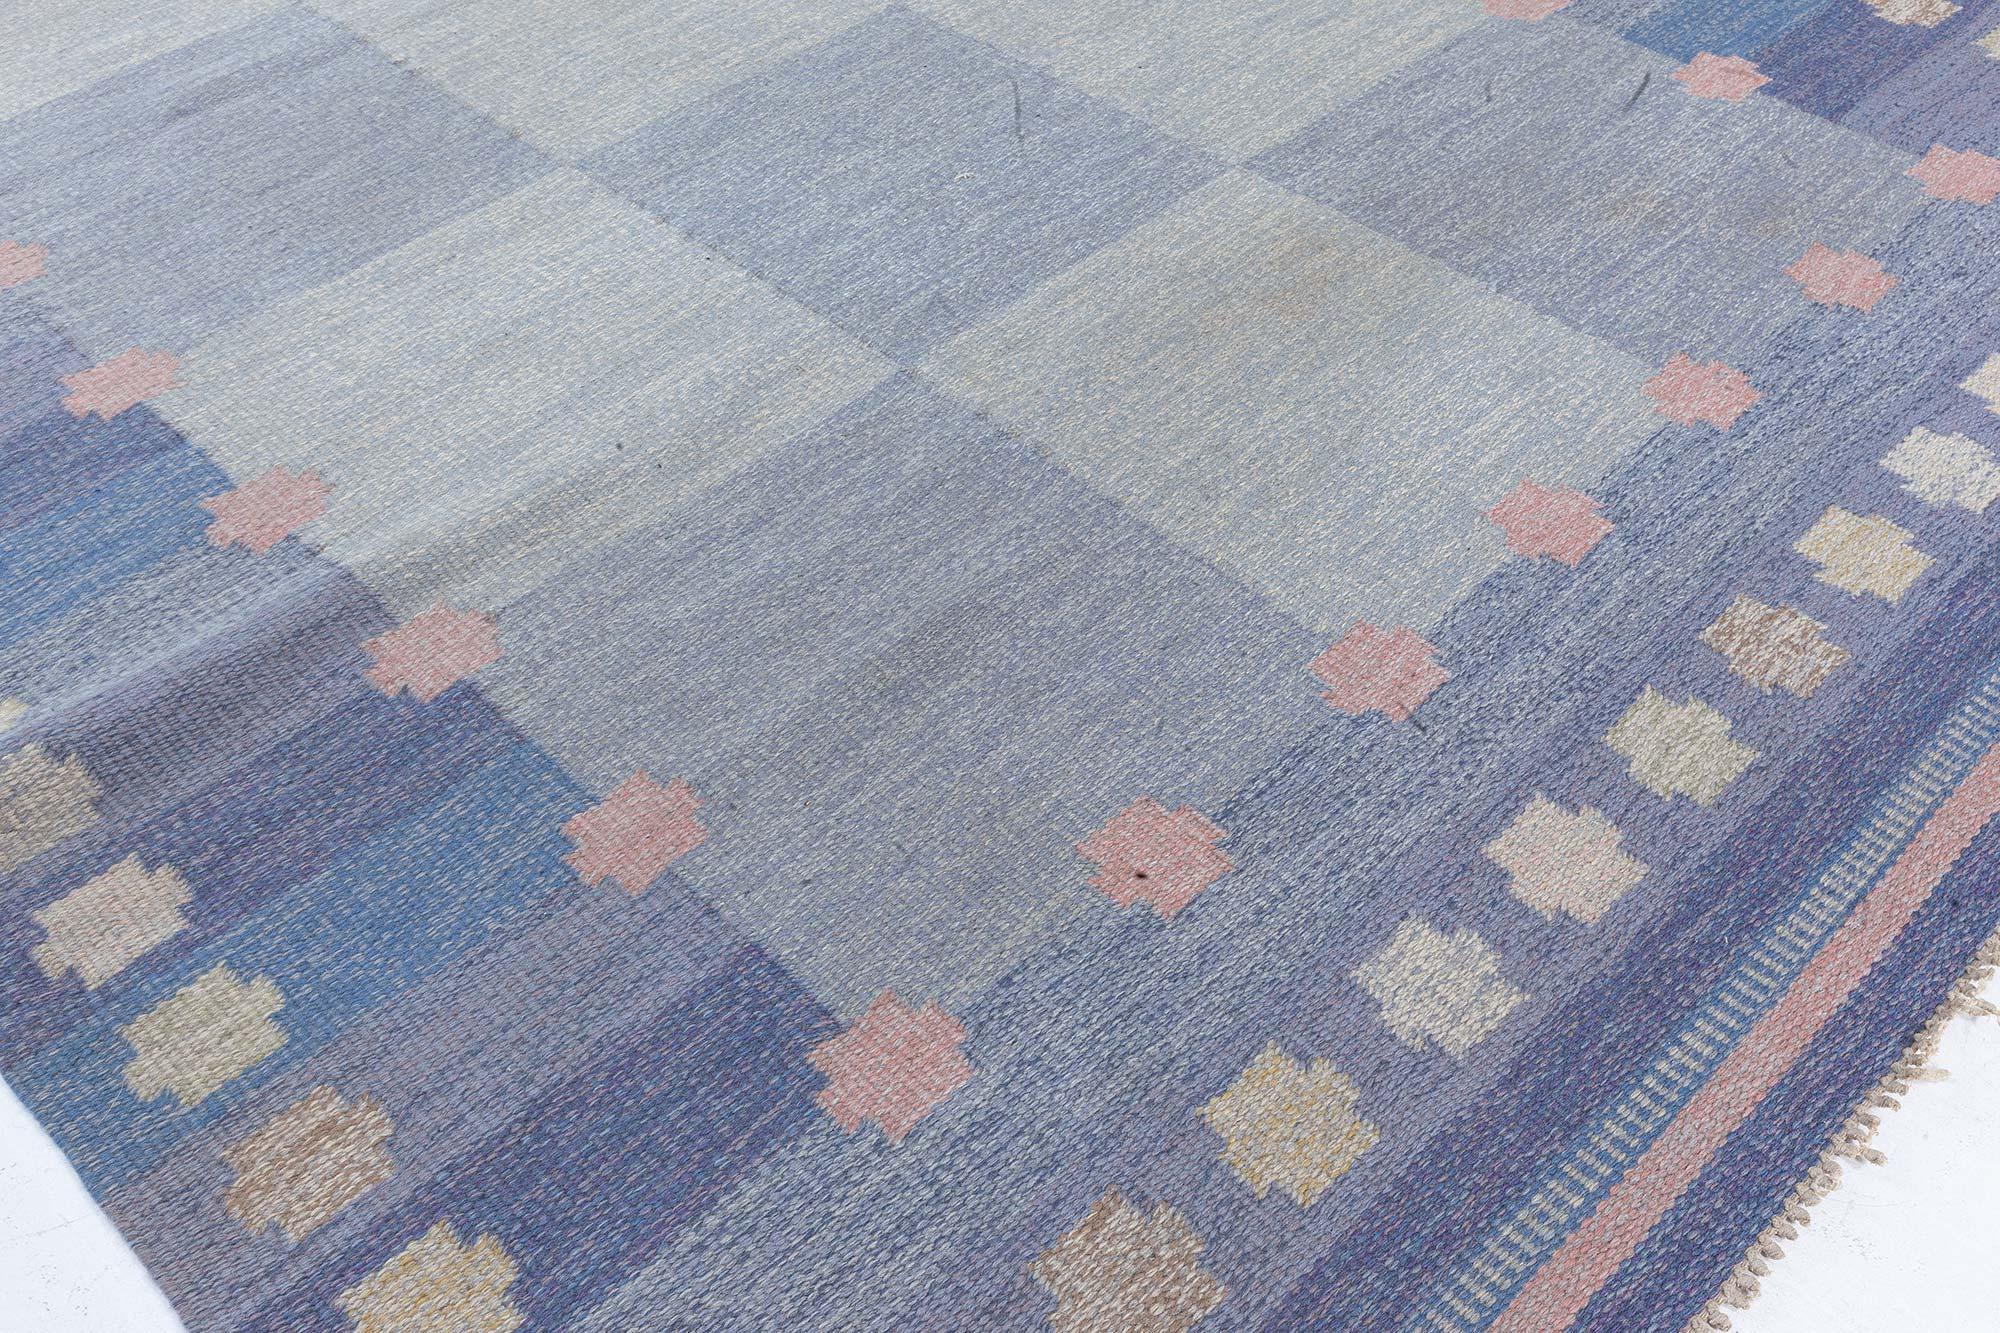 Wool Mid-20th Century Swedish Flat Woven Rug by Agda Osterberg For Sale